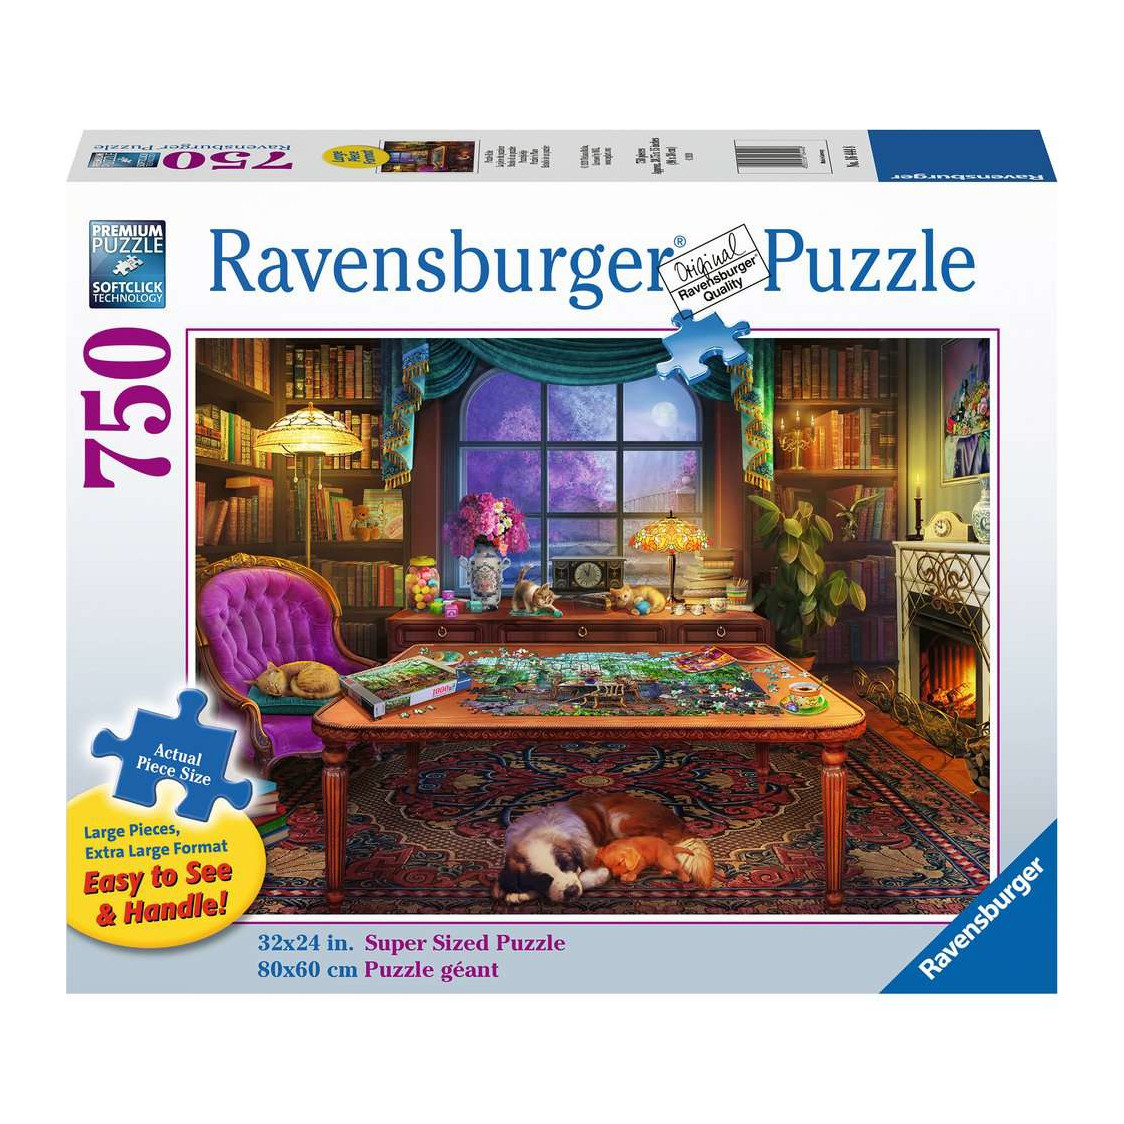 Ravensburger Mischief Makers Large Format 300 Piece Jigsaw Puzzle for  Adults – Every Piece is Unique, Softclick Technology Means Pieces Fit  Together